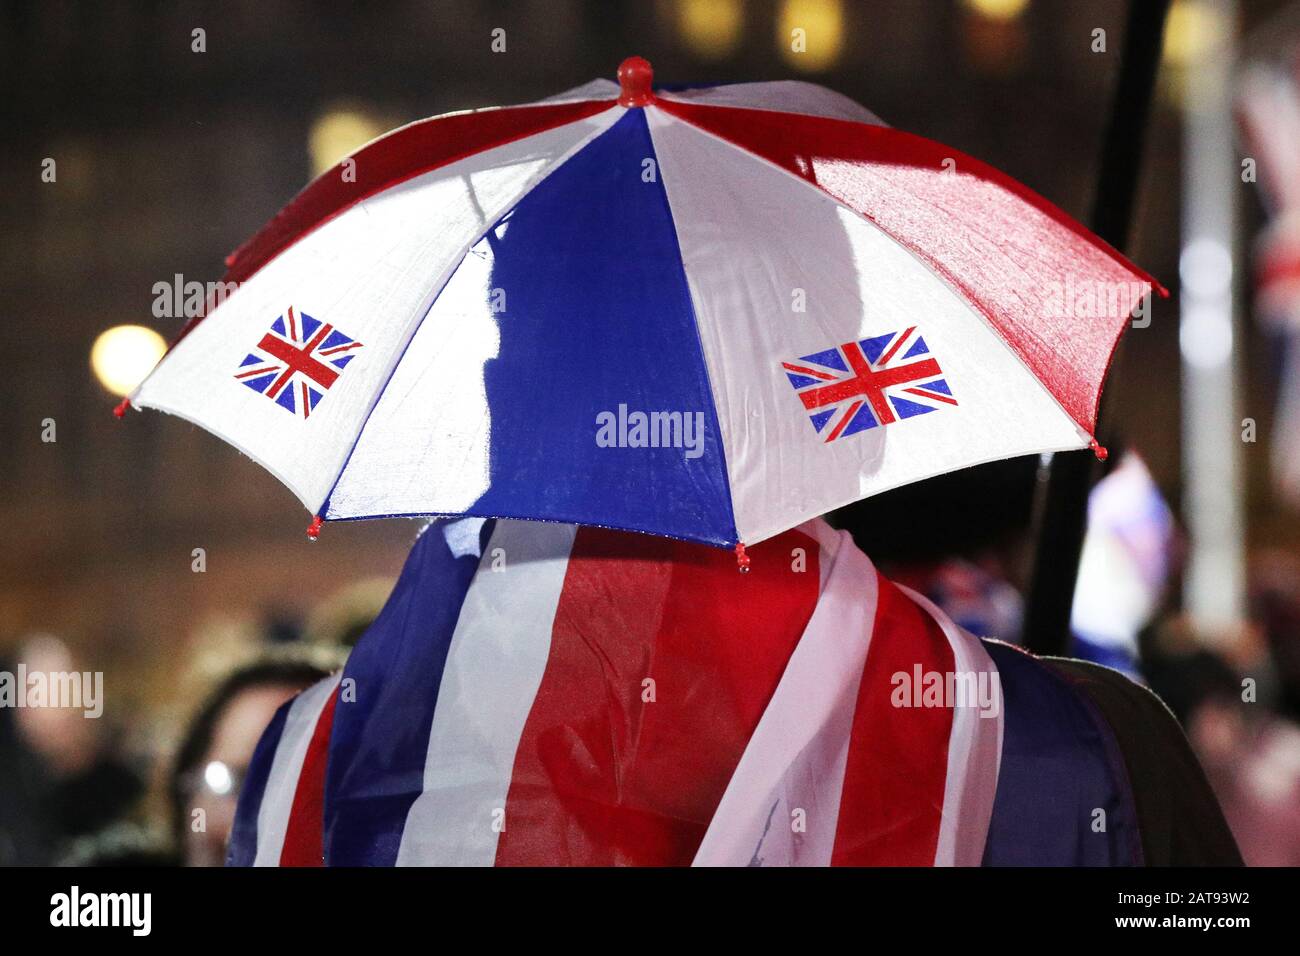 A Pro-Brexit supporter shelters from the rain in Parliament Square, London, ahead of the UK leaving the European Union at 11pm on Friday. Stock Photo